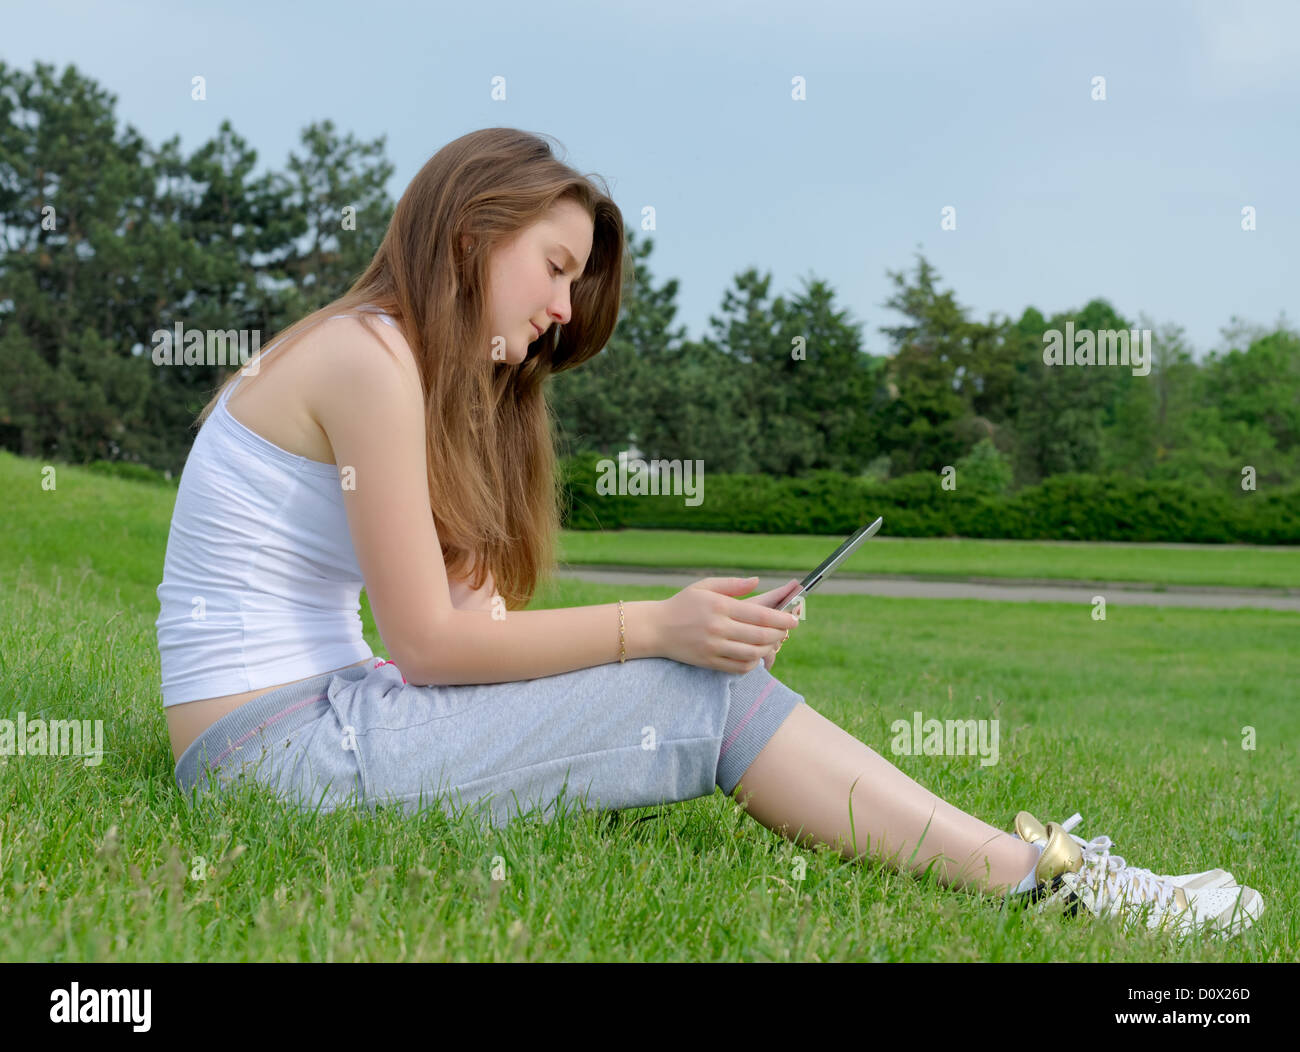 Side view of a young woman sitting in green grass working on a touchscreen tablet in the park Stock Photo